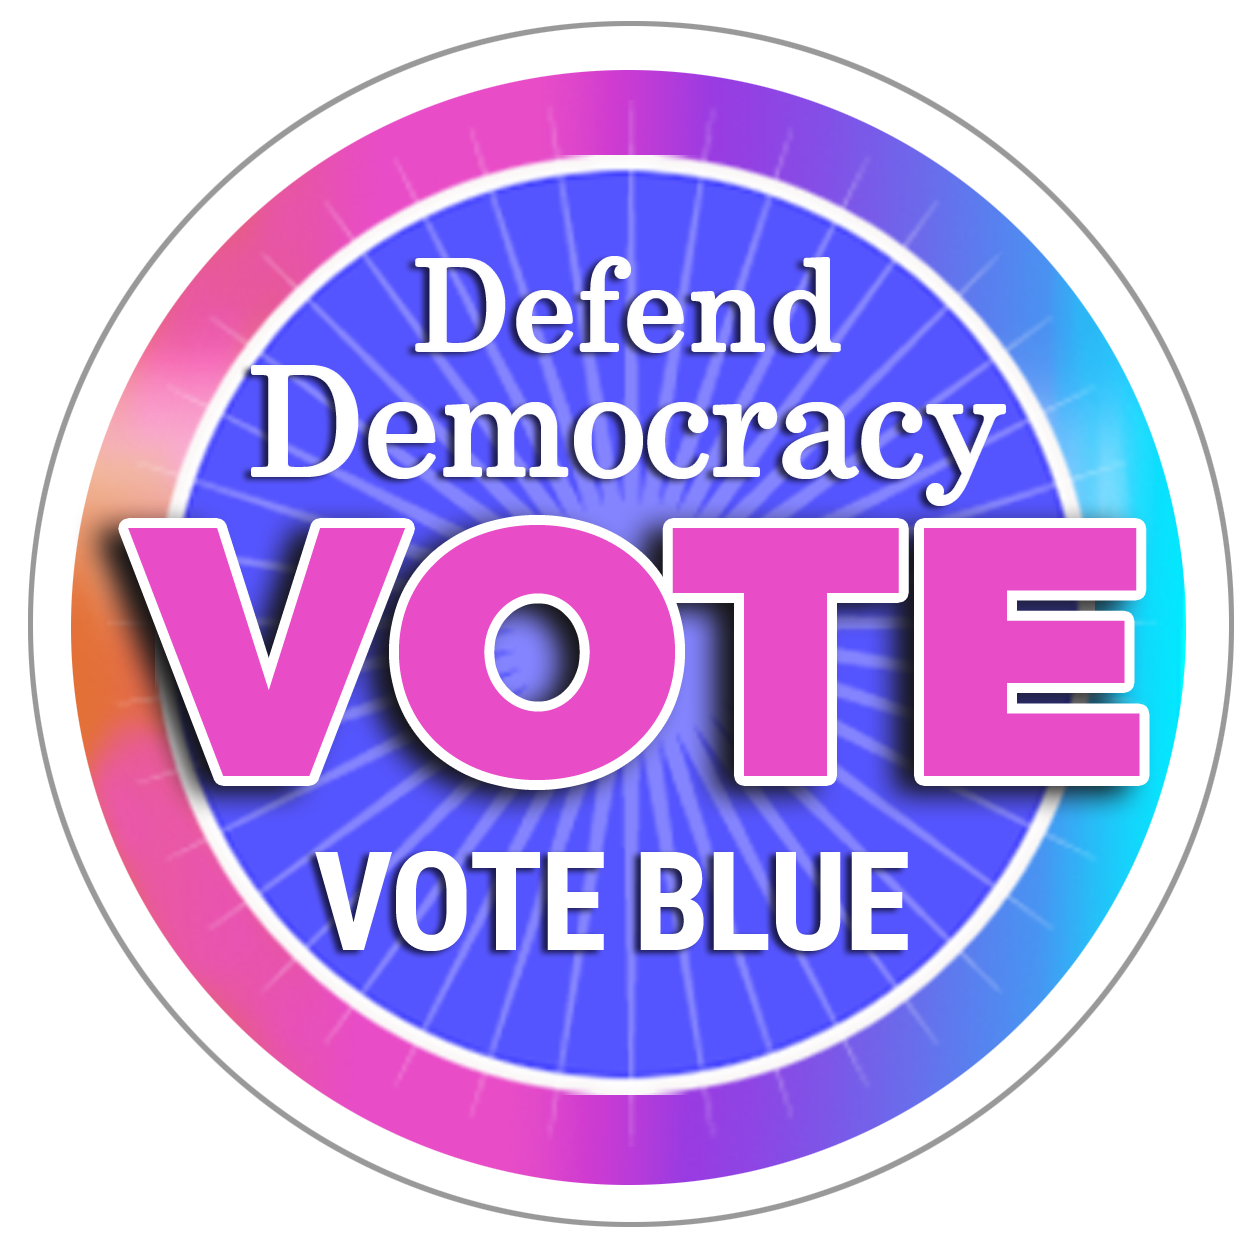 Defend Democracy. VOTE on or before TUES, NOV 7